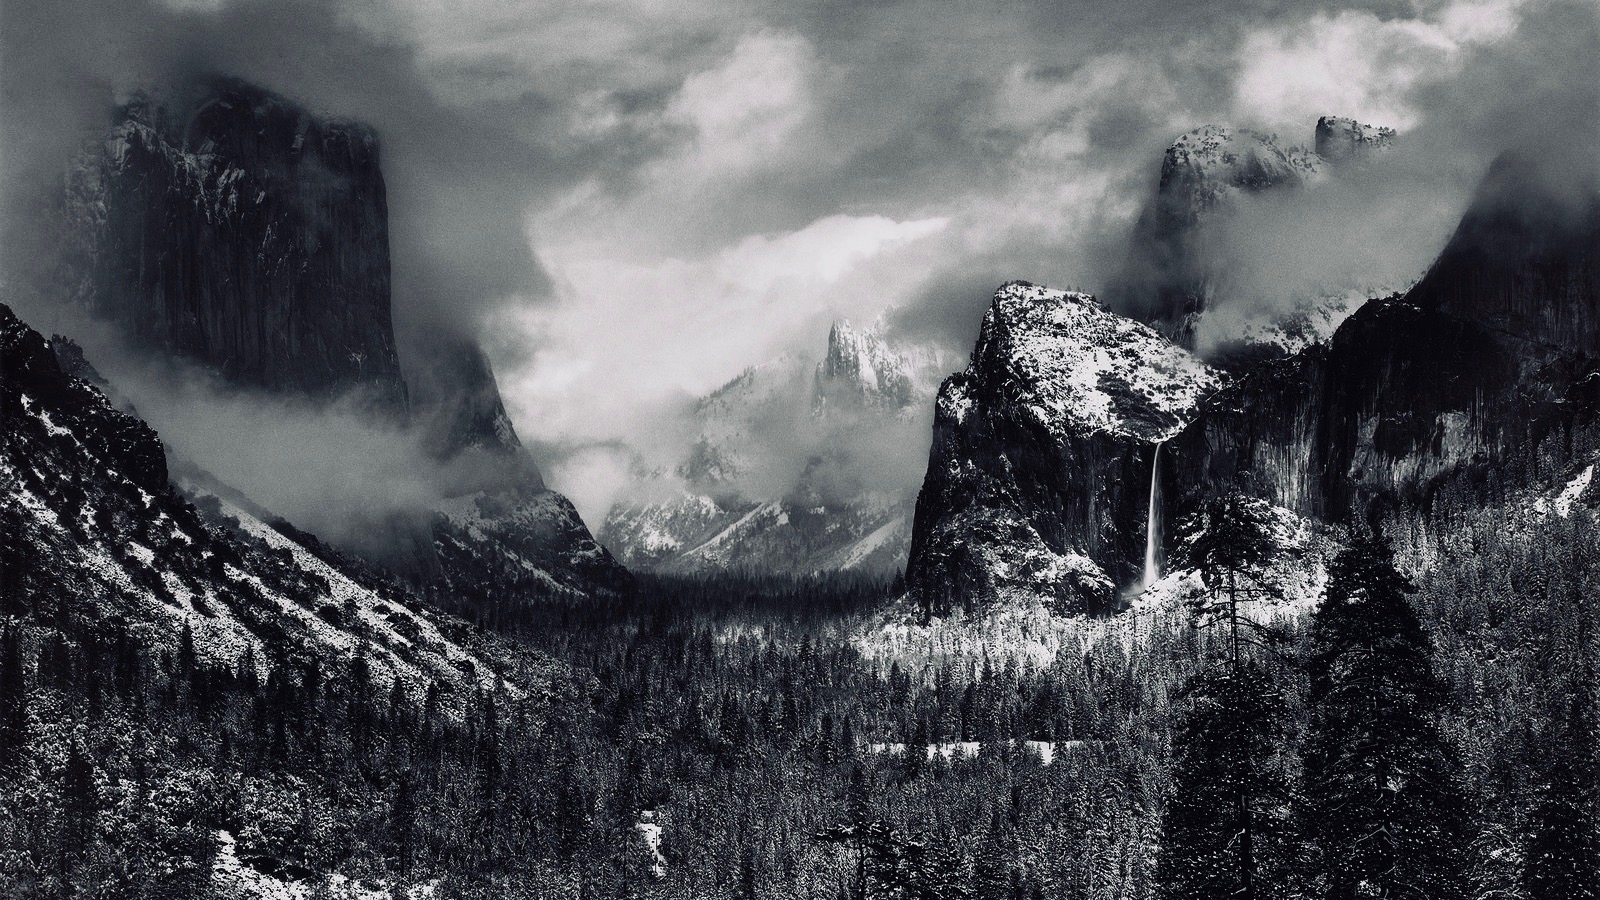 photography from the influences of Noah Newman by Ansel Adams